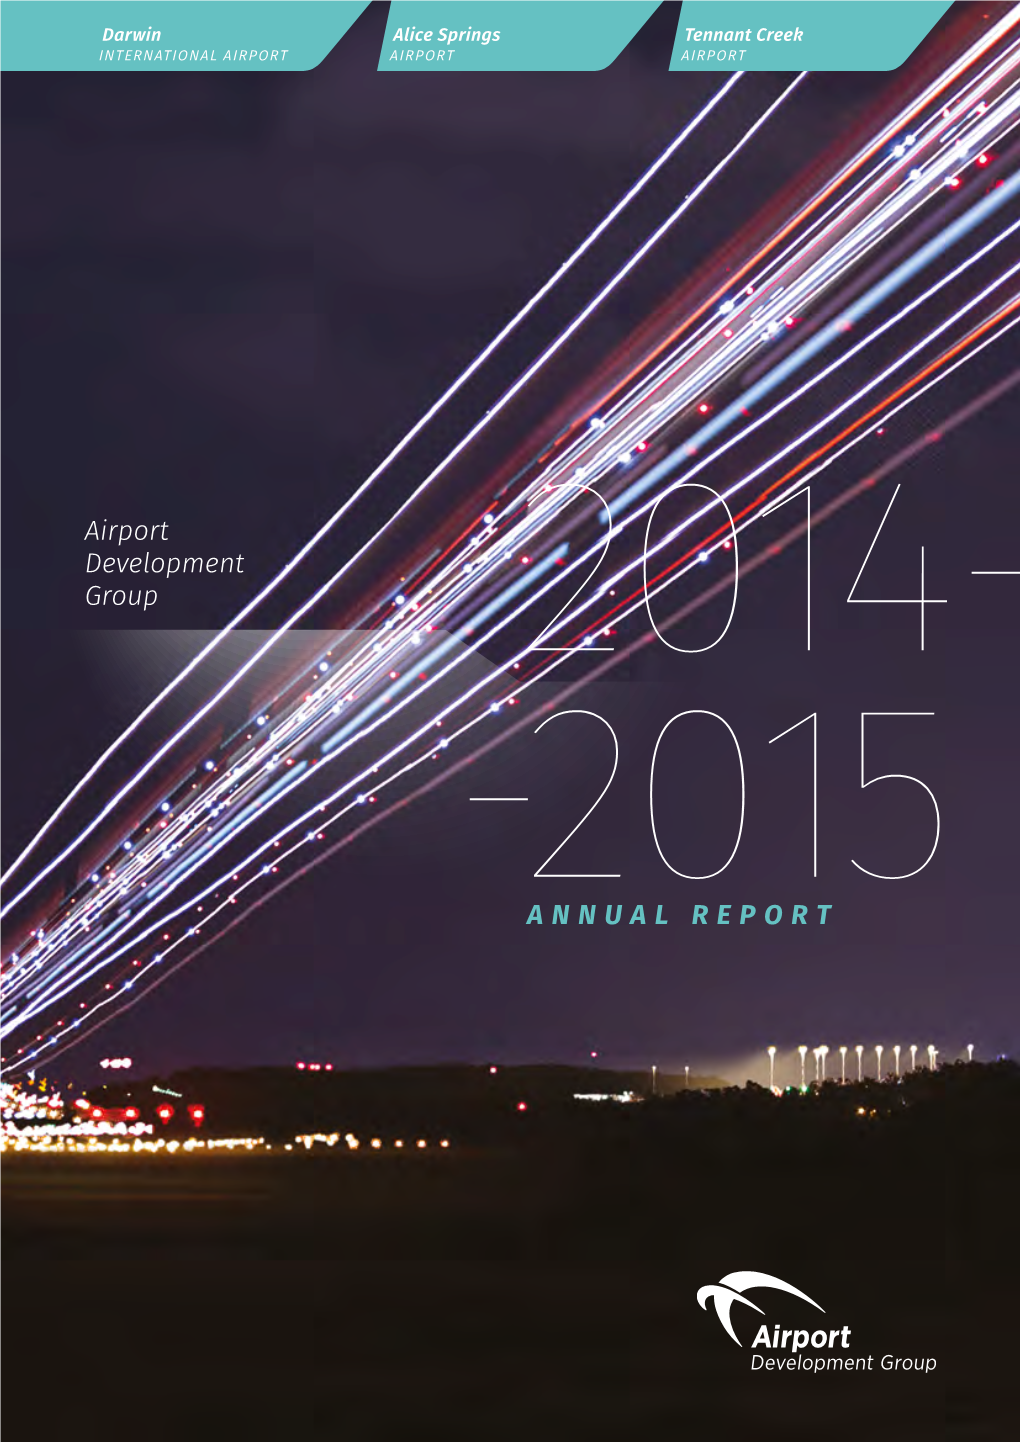 Airport Development Group ANNUAL REPORT